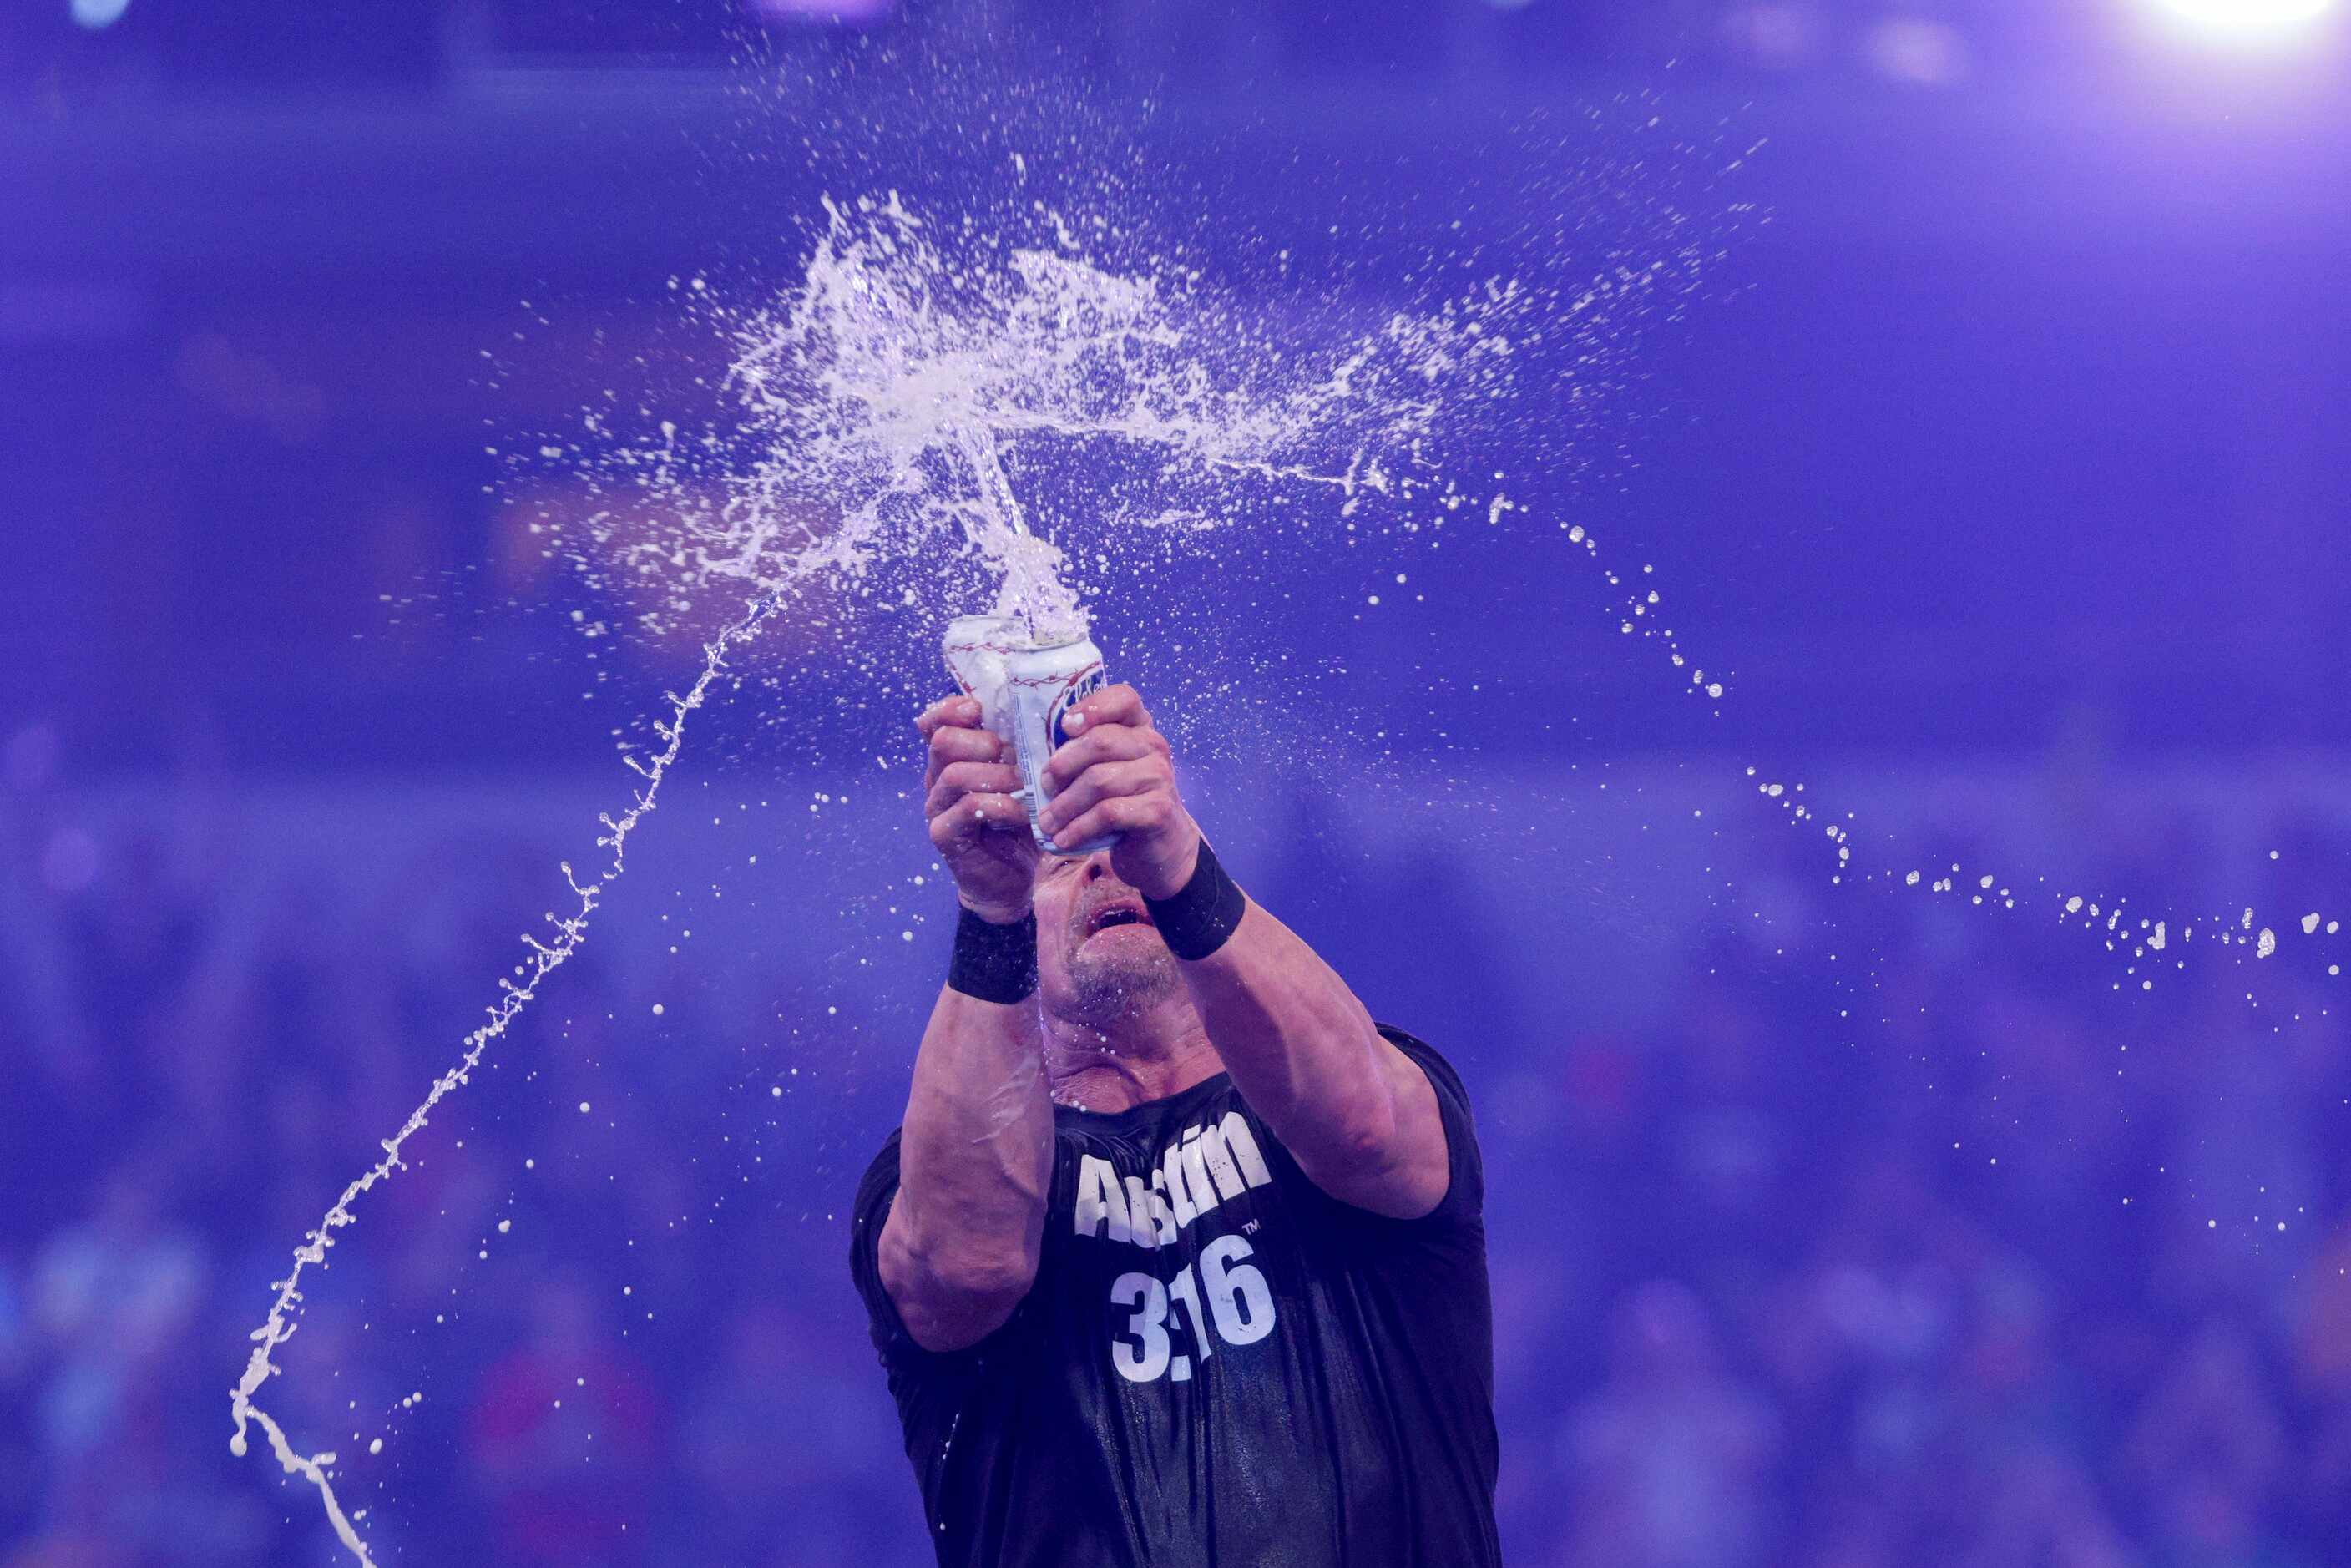 “Stone Cold” Steve Austin smashes two beers together after defeating Kevin Owens in a match...